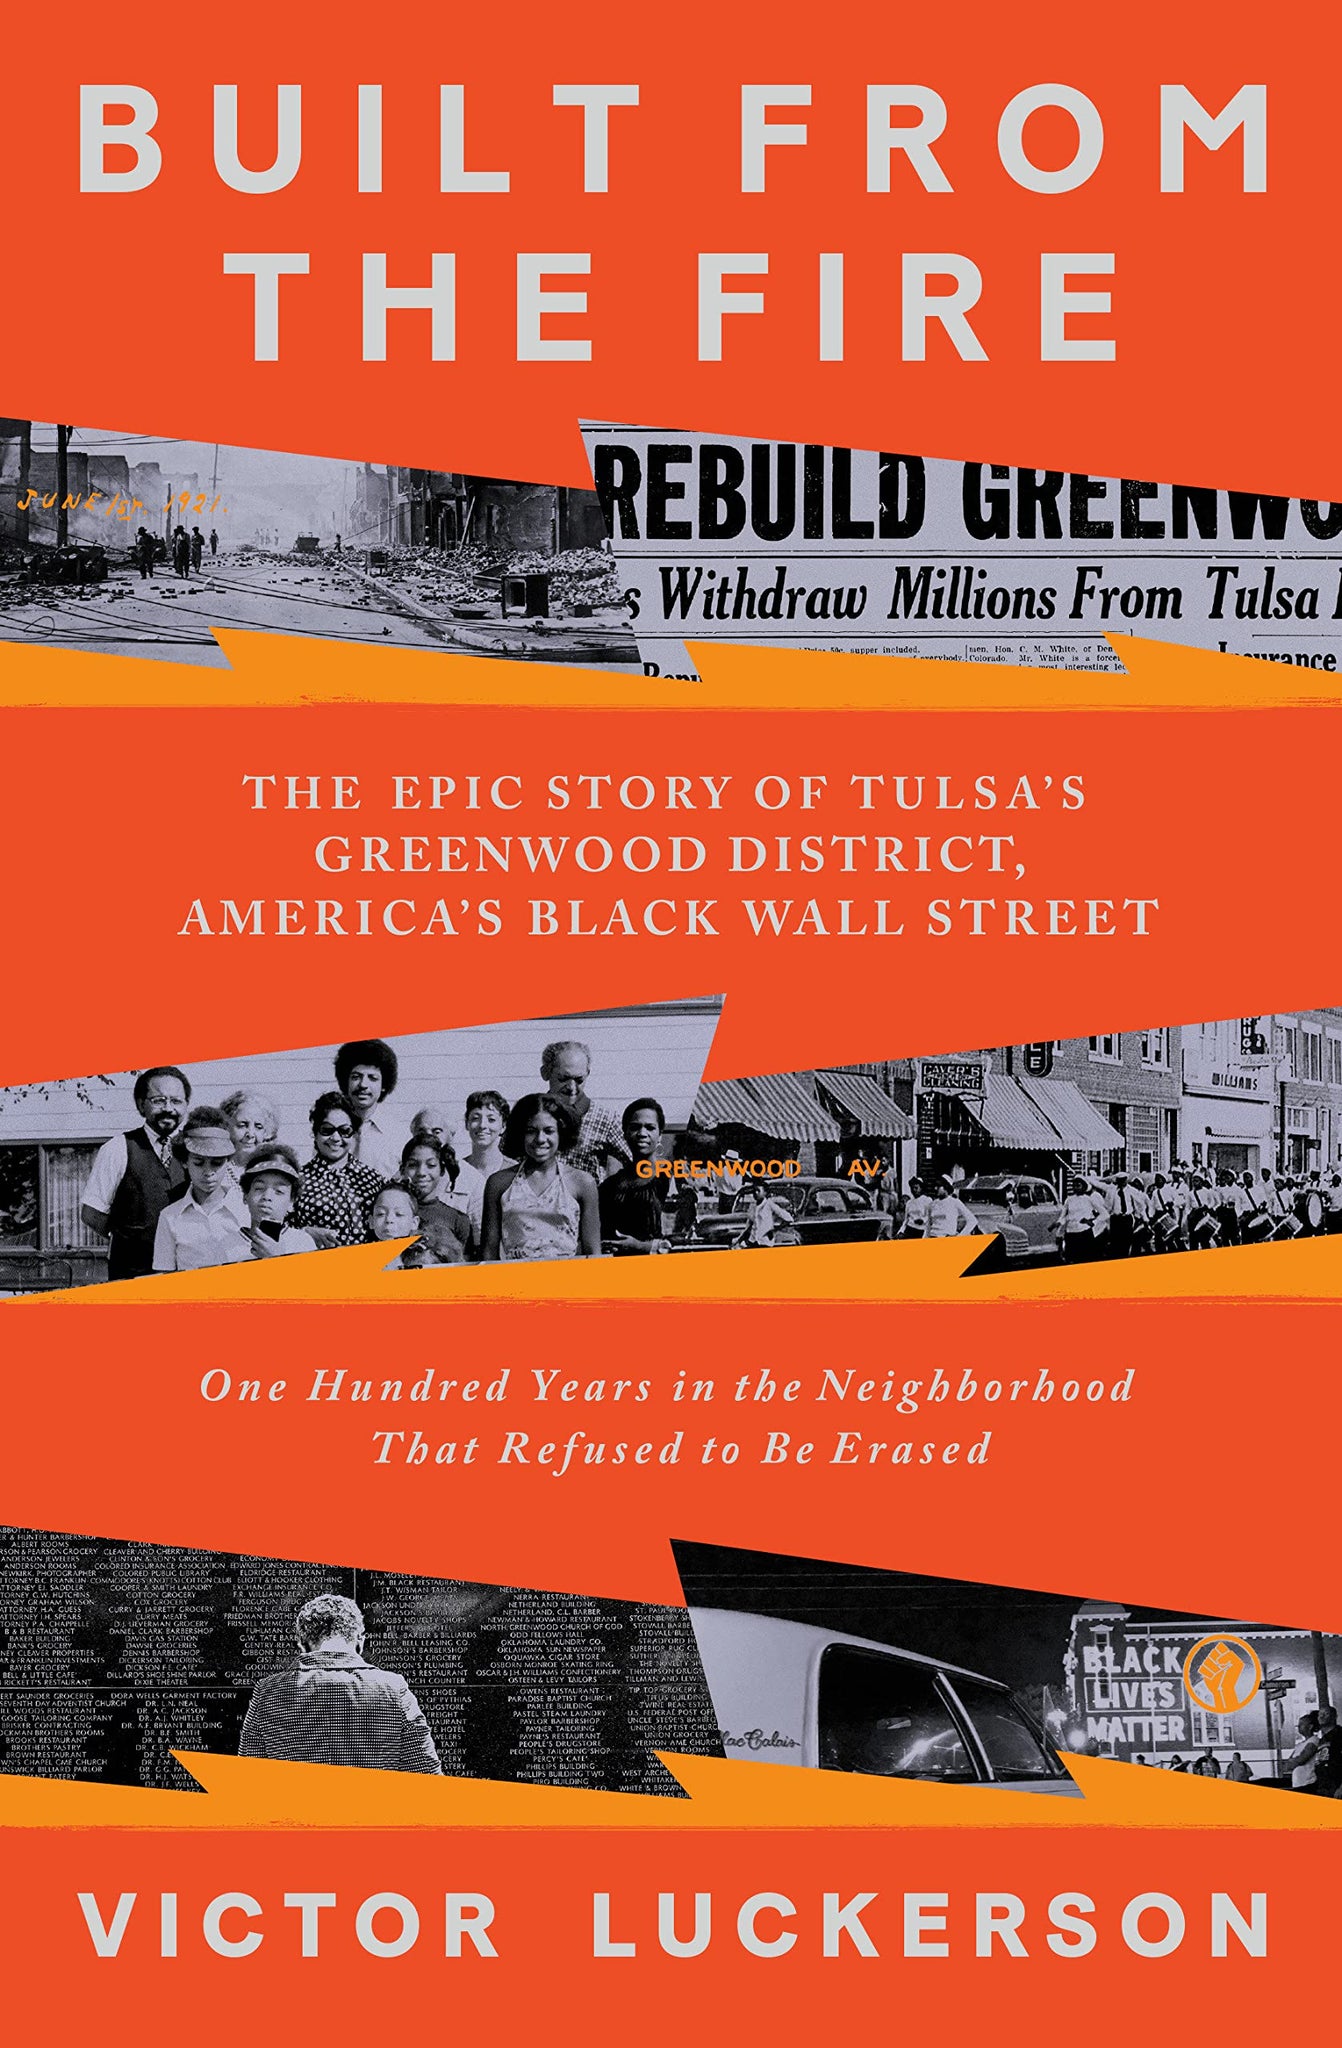 Built from the Fire: The Epic Story of Tulsa's Greenwood District, America's Black Wall Street (Hardcover)